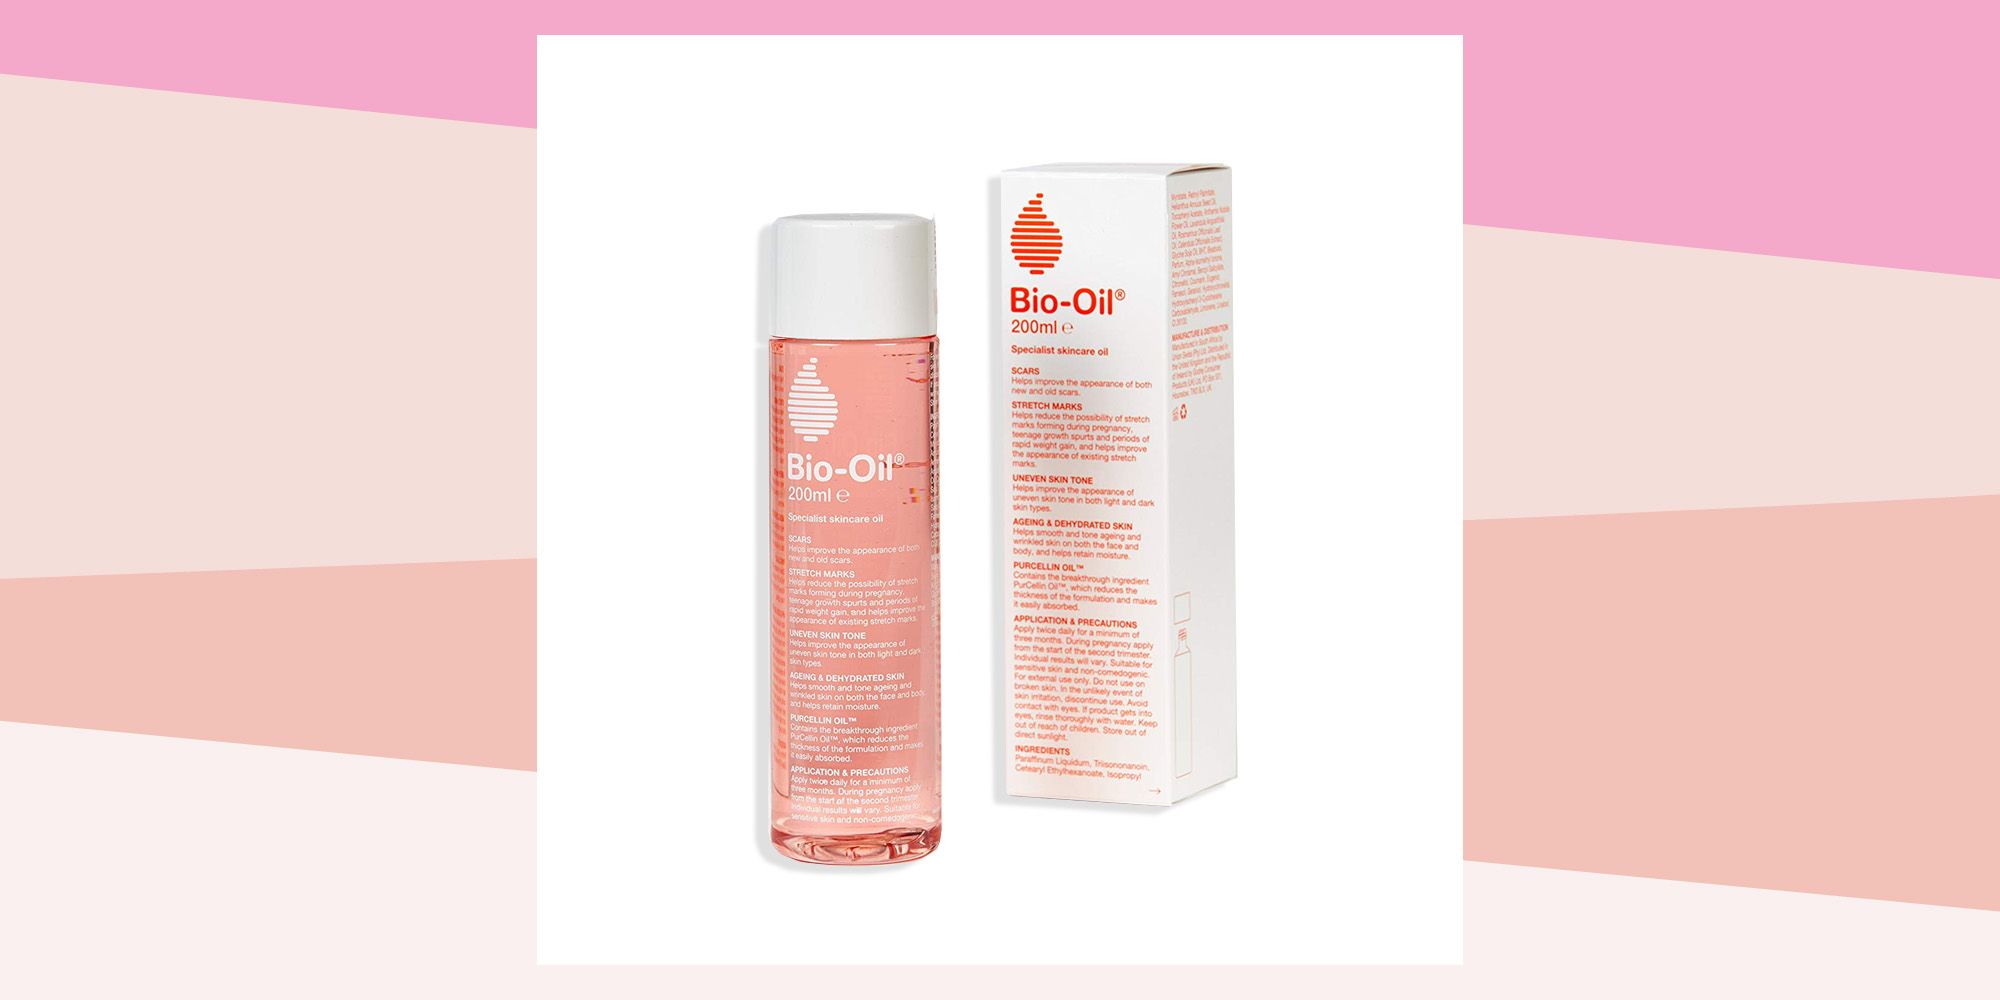 18 You Didn't Know You Could Use Bio-Oil